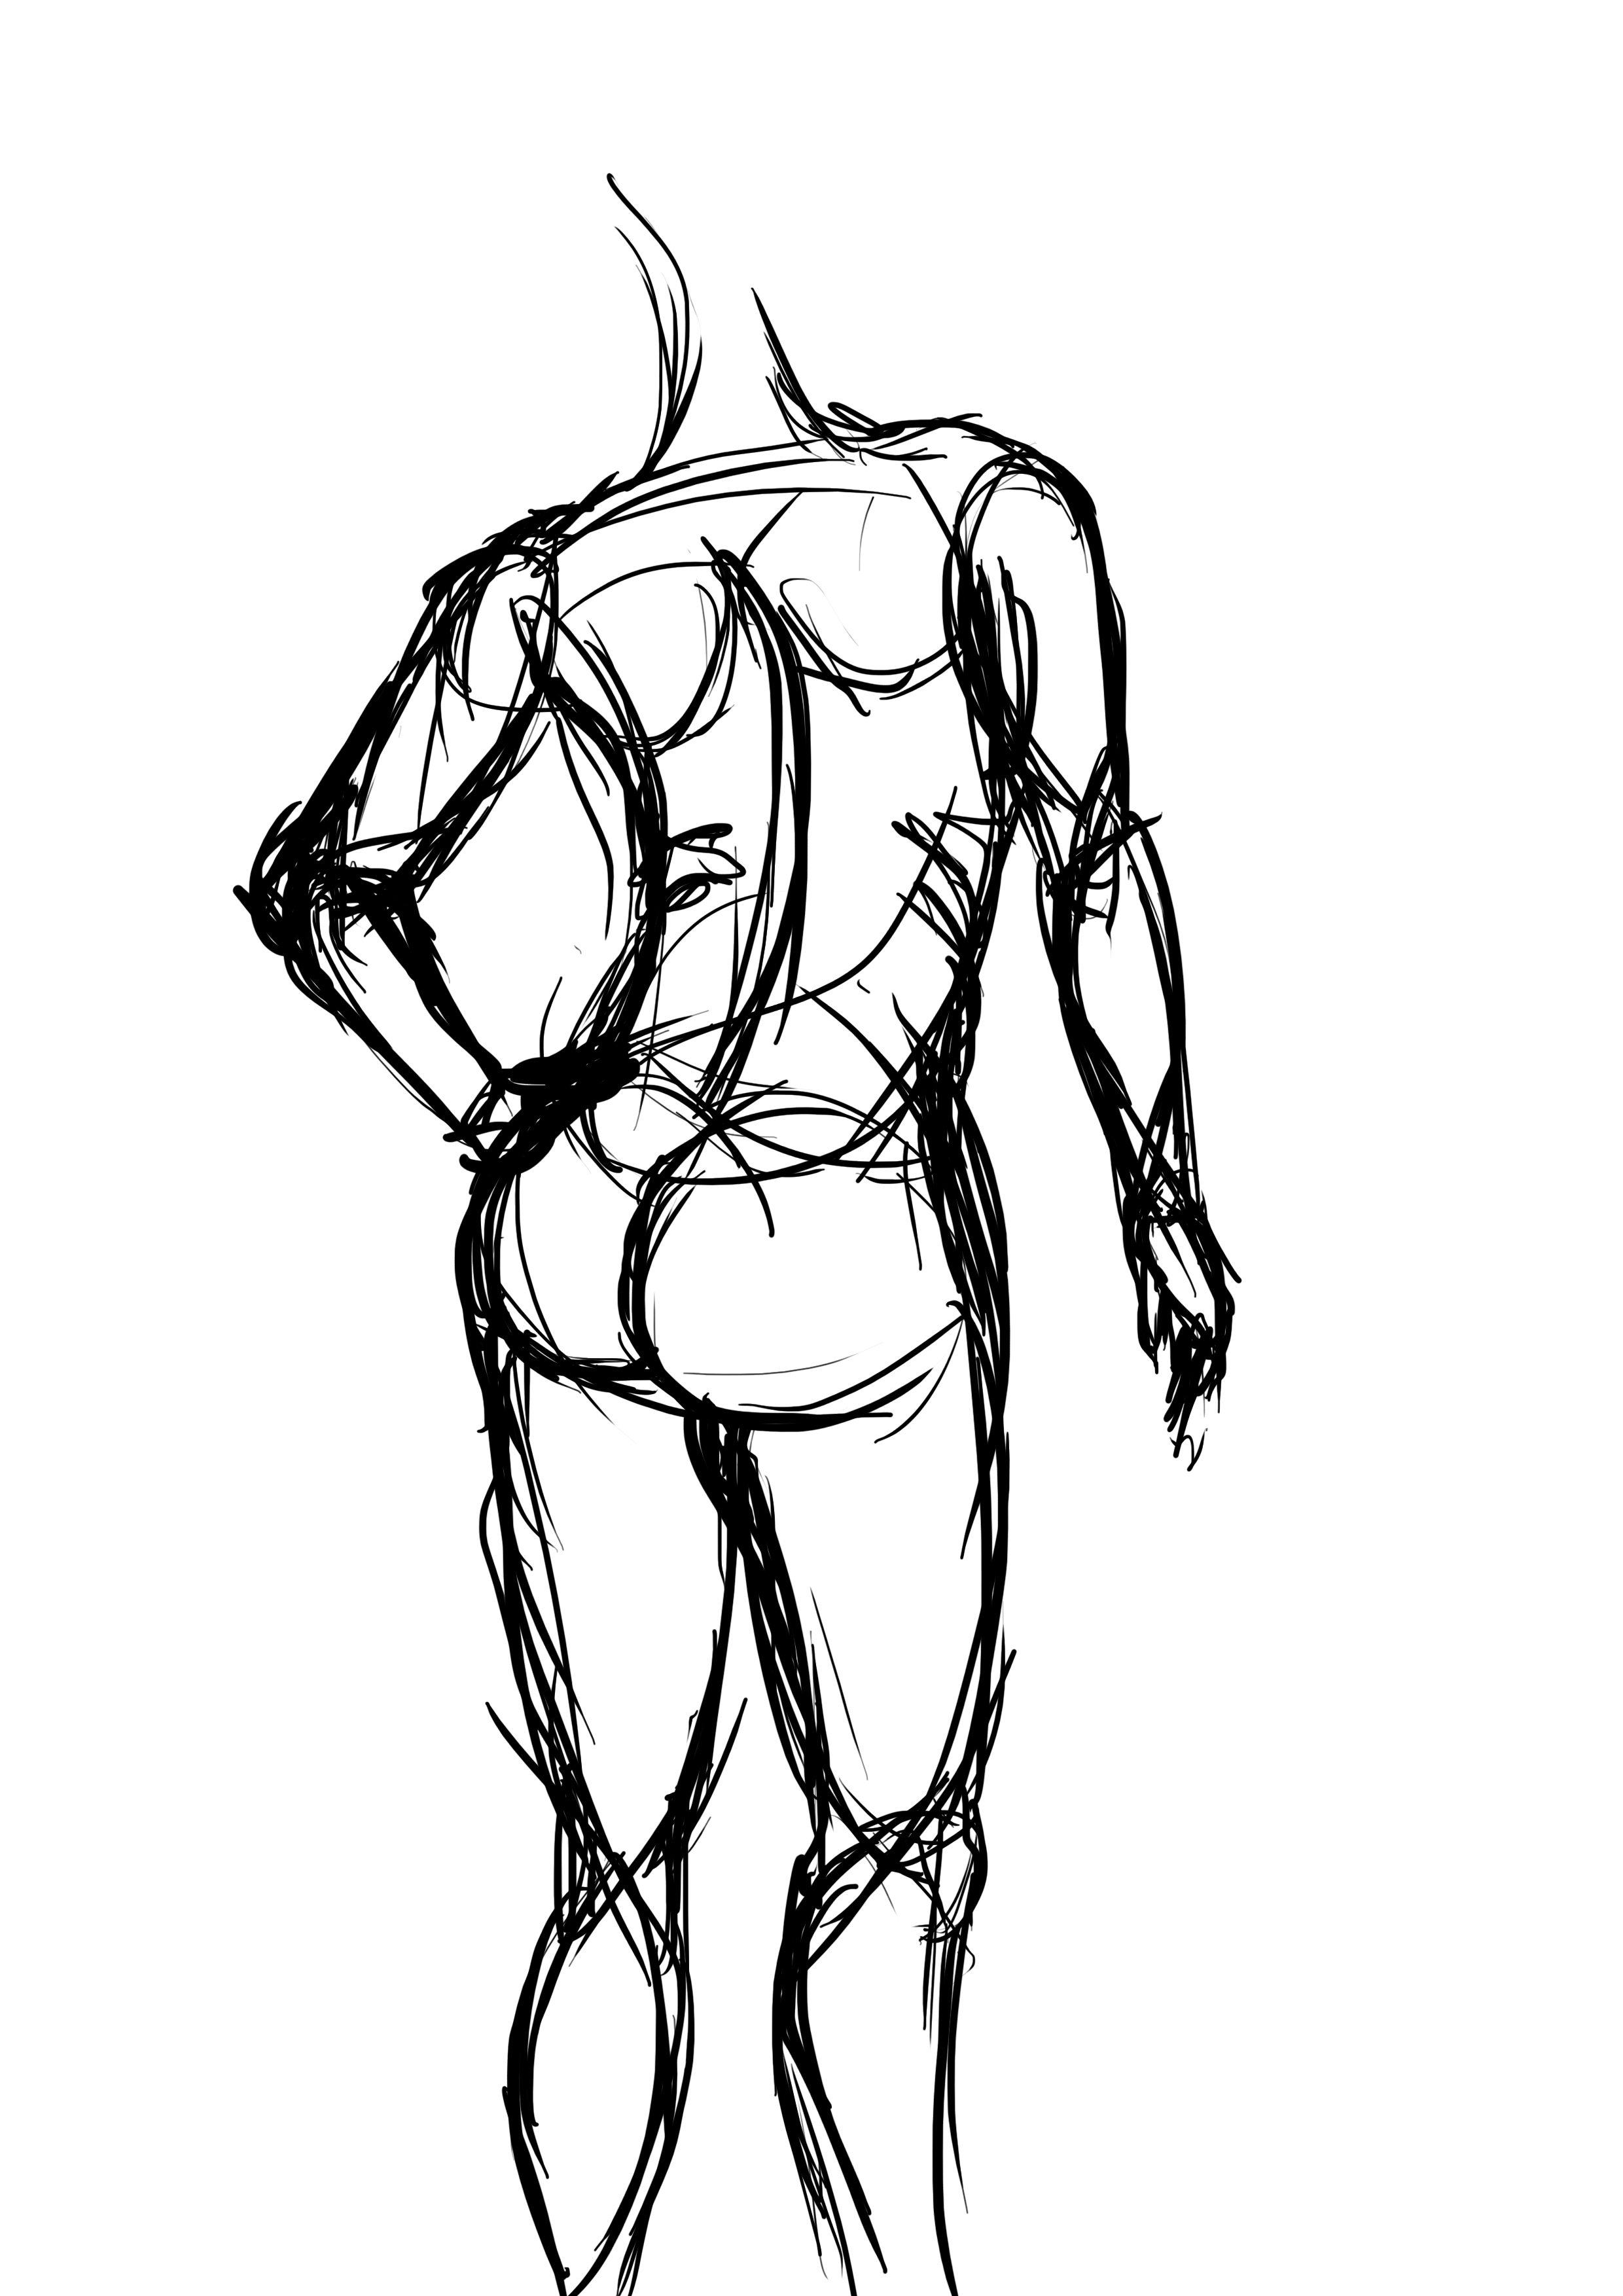  Human Body Line Drawing at GetDrawings com Free for personal use 